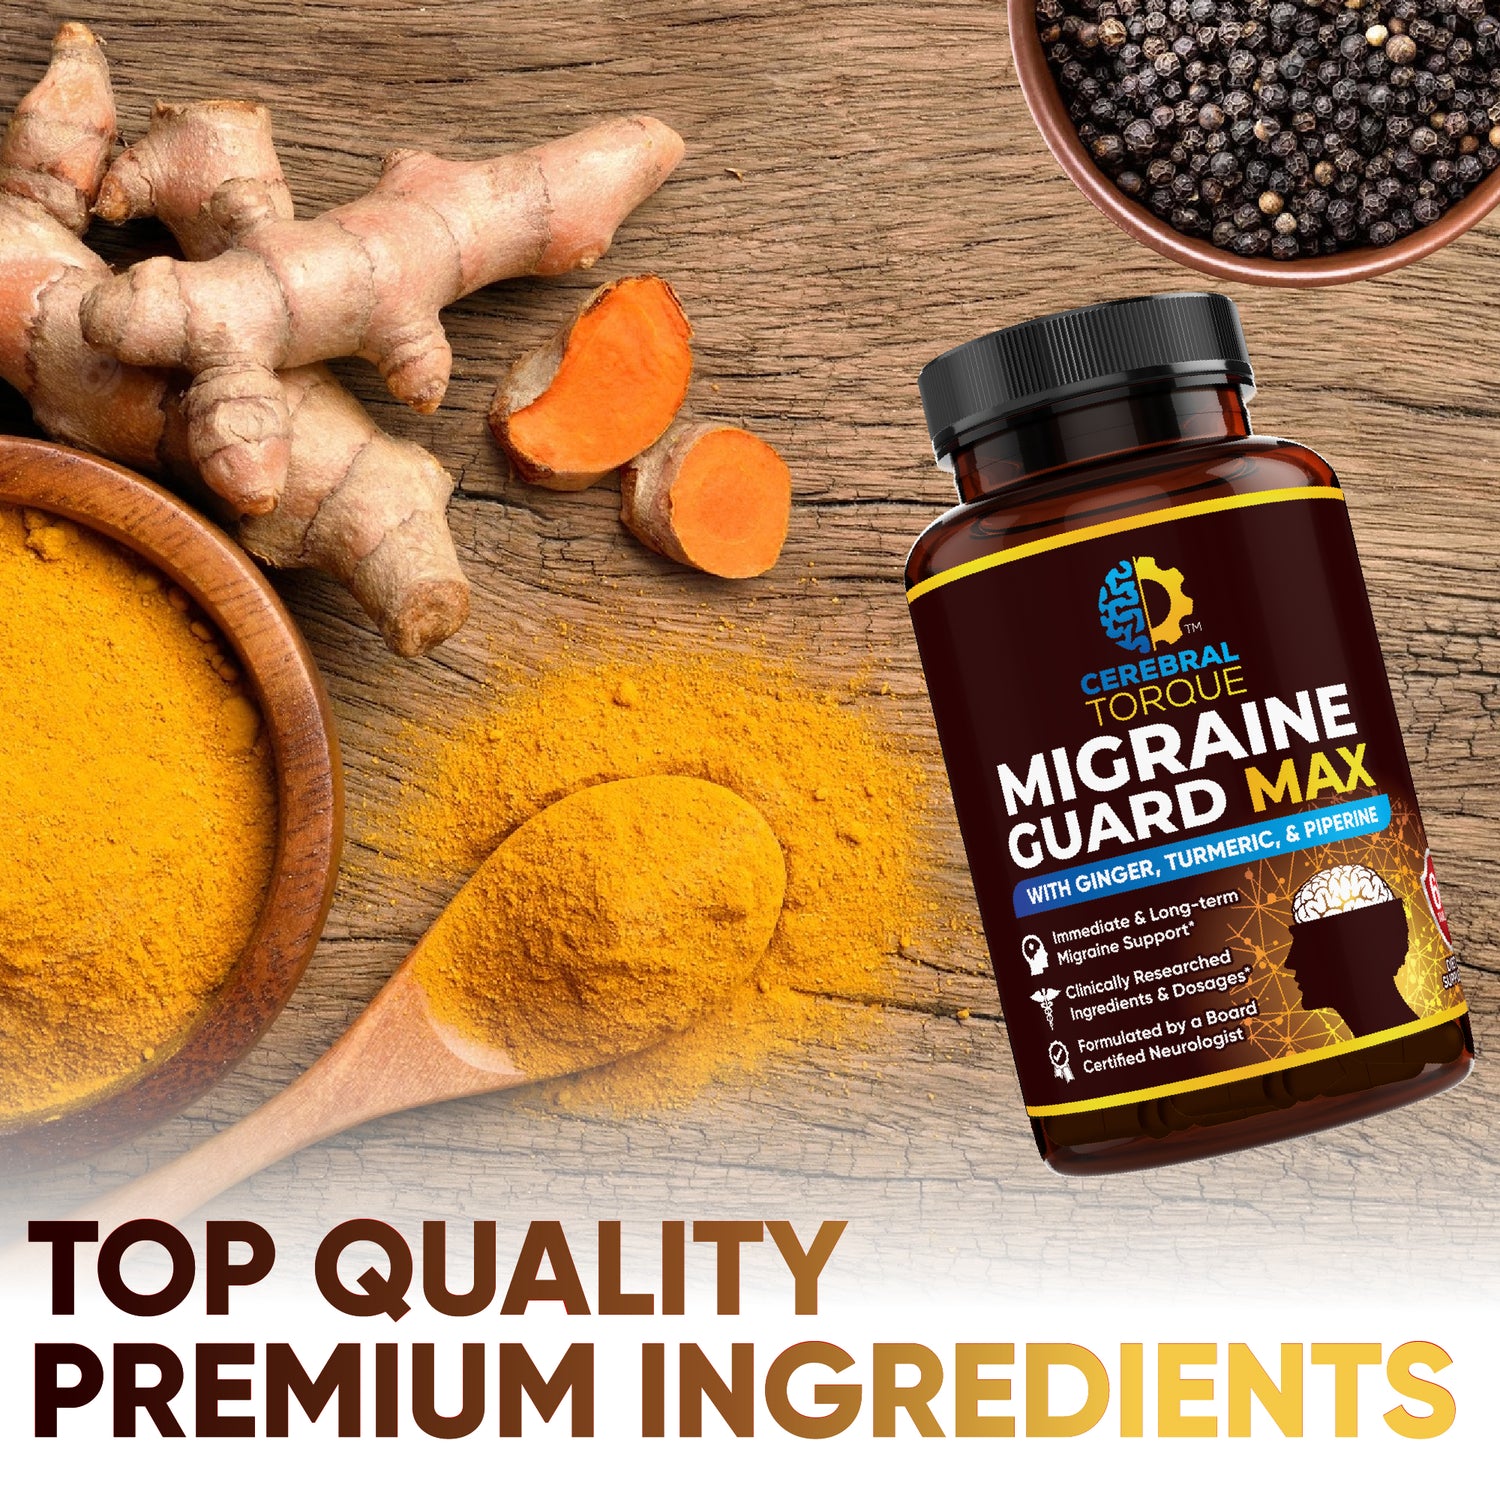 Top quality ingredients for Migraine Guard MAX. We use a 10:1 extract for our herbs. Powdered extracts are extremely potent and very shelf stable